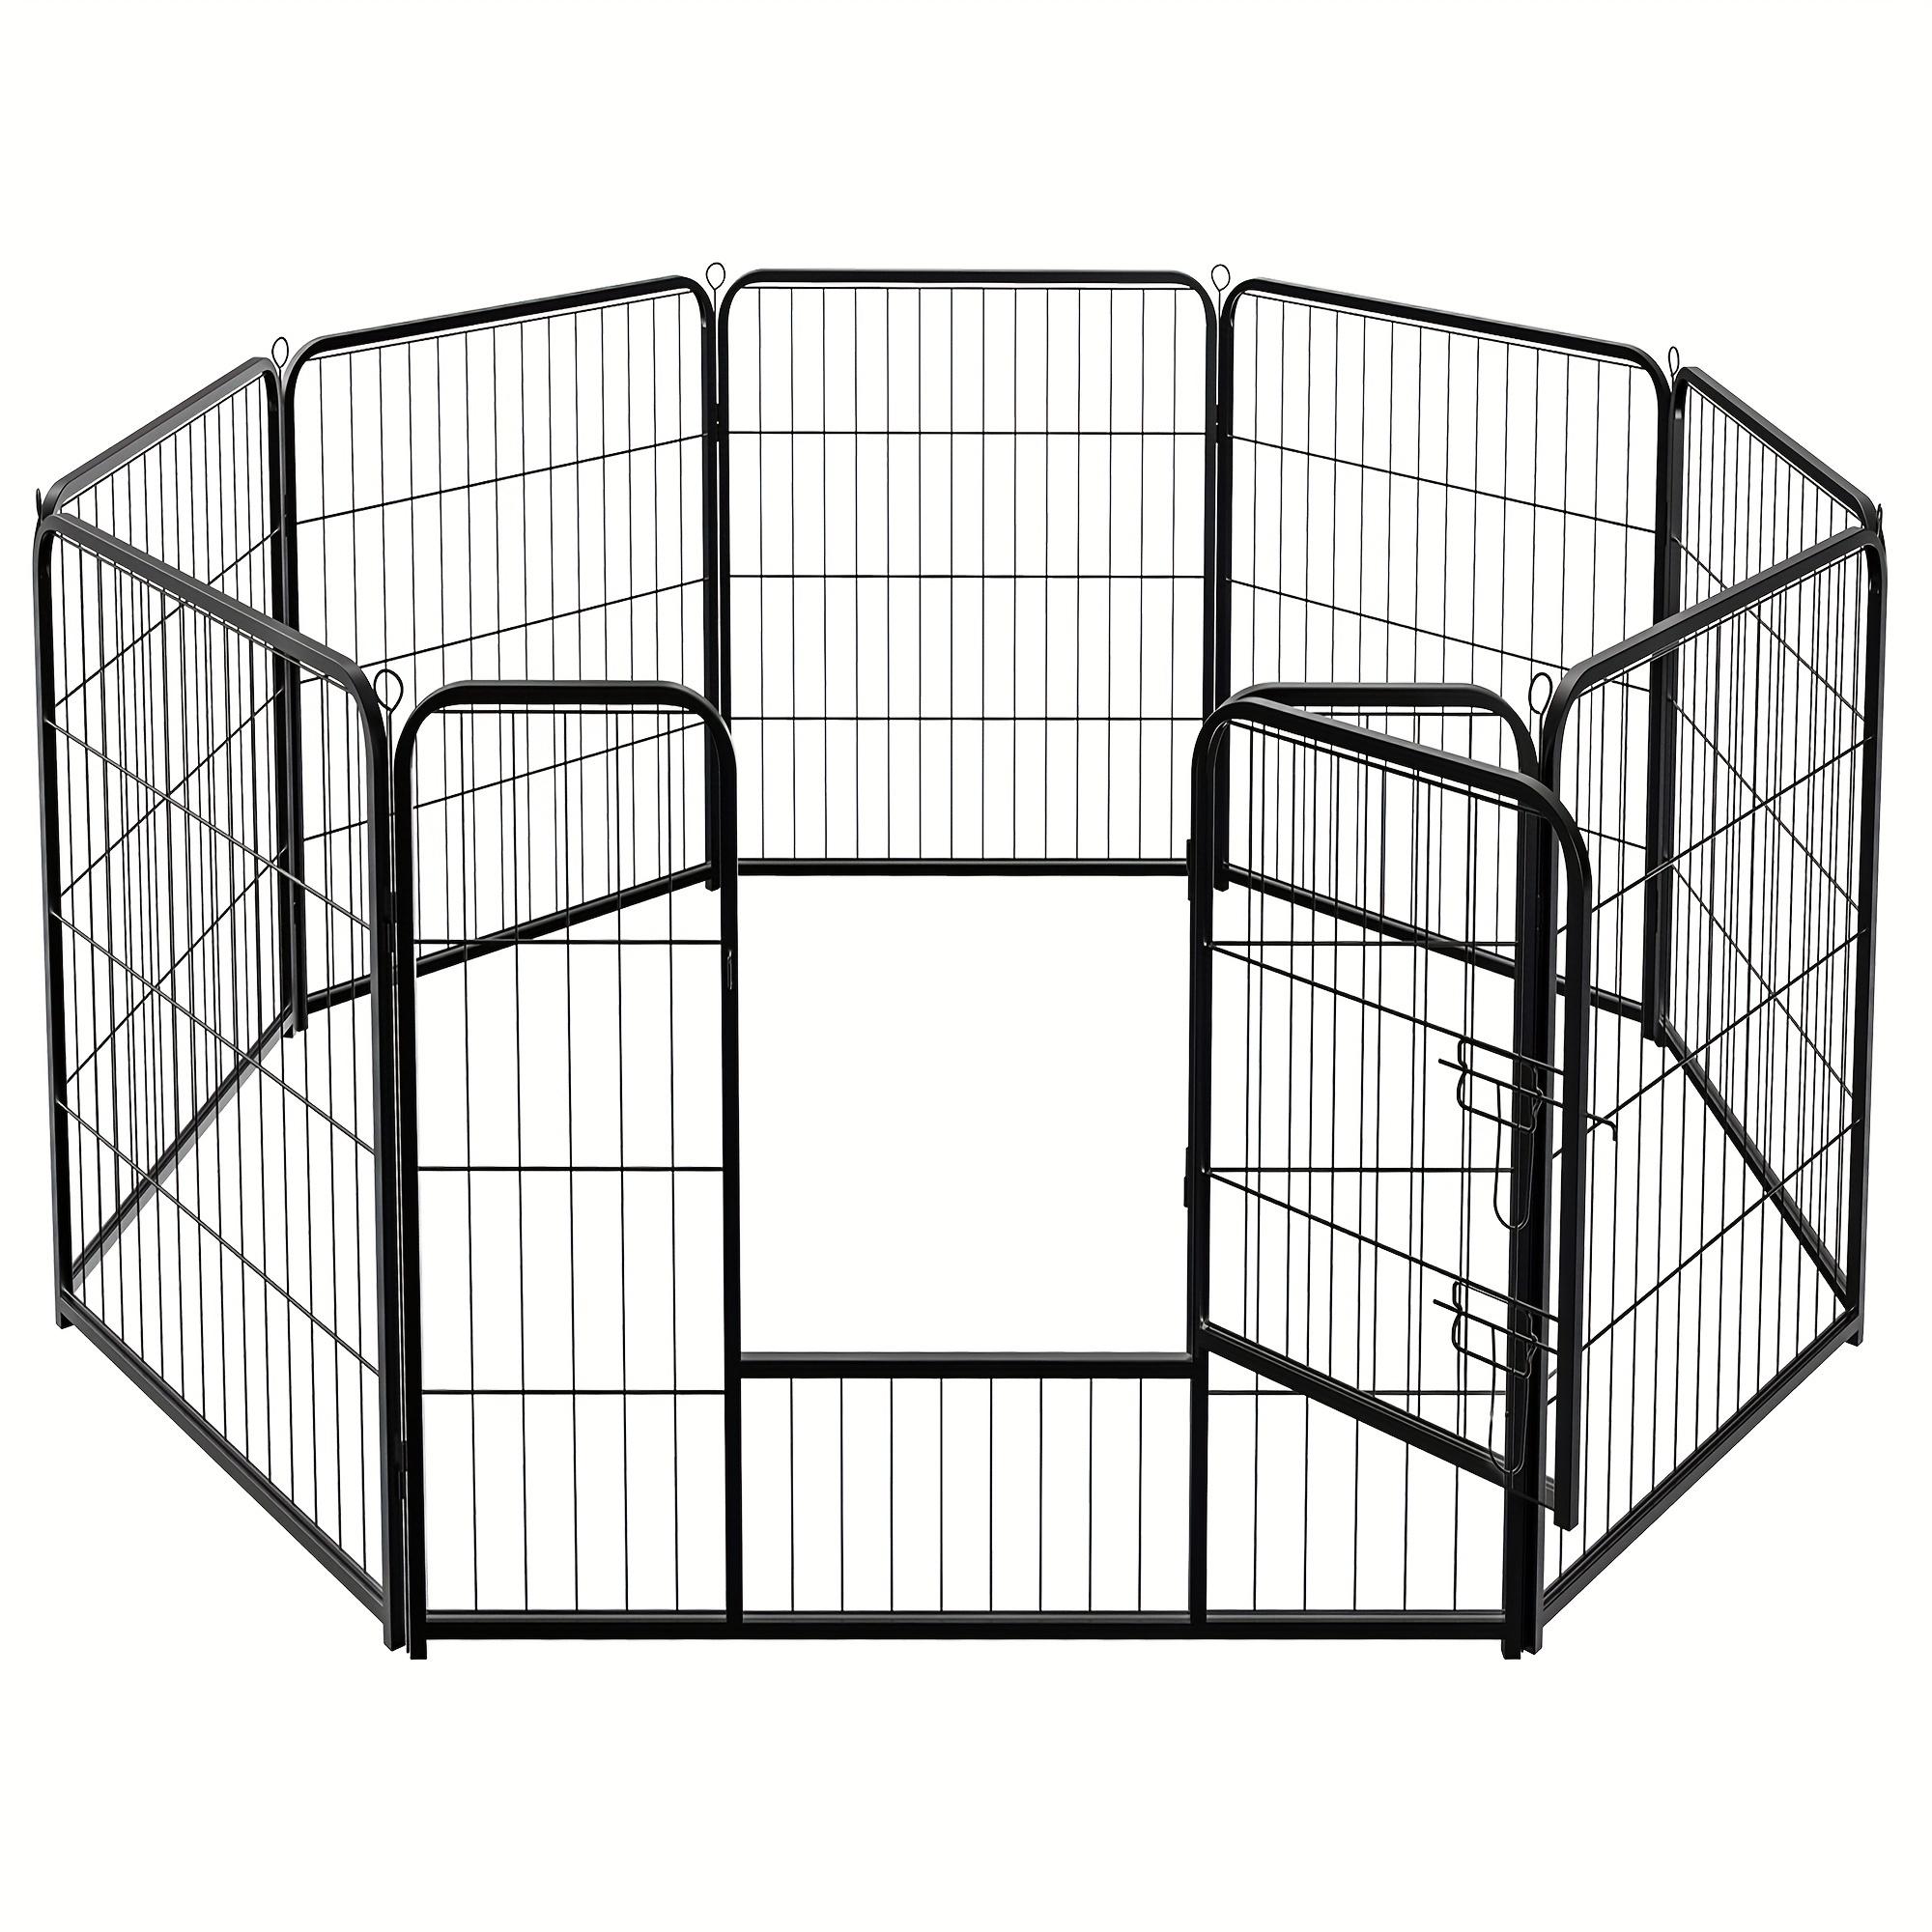 

Sweetcrispy Dog Playpen Indoor Pet Fence Outdoor 8 Panel 40" Height Metal Exercise Puppy Pen With Door For Large/medium/small Dogs Portable For Garden, Yard, Rv Camping